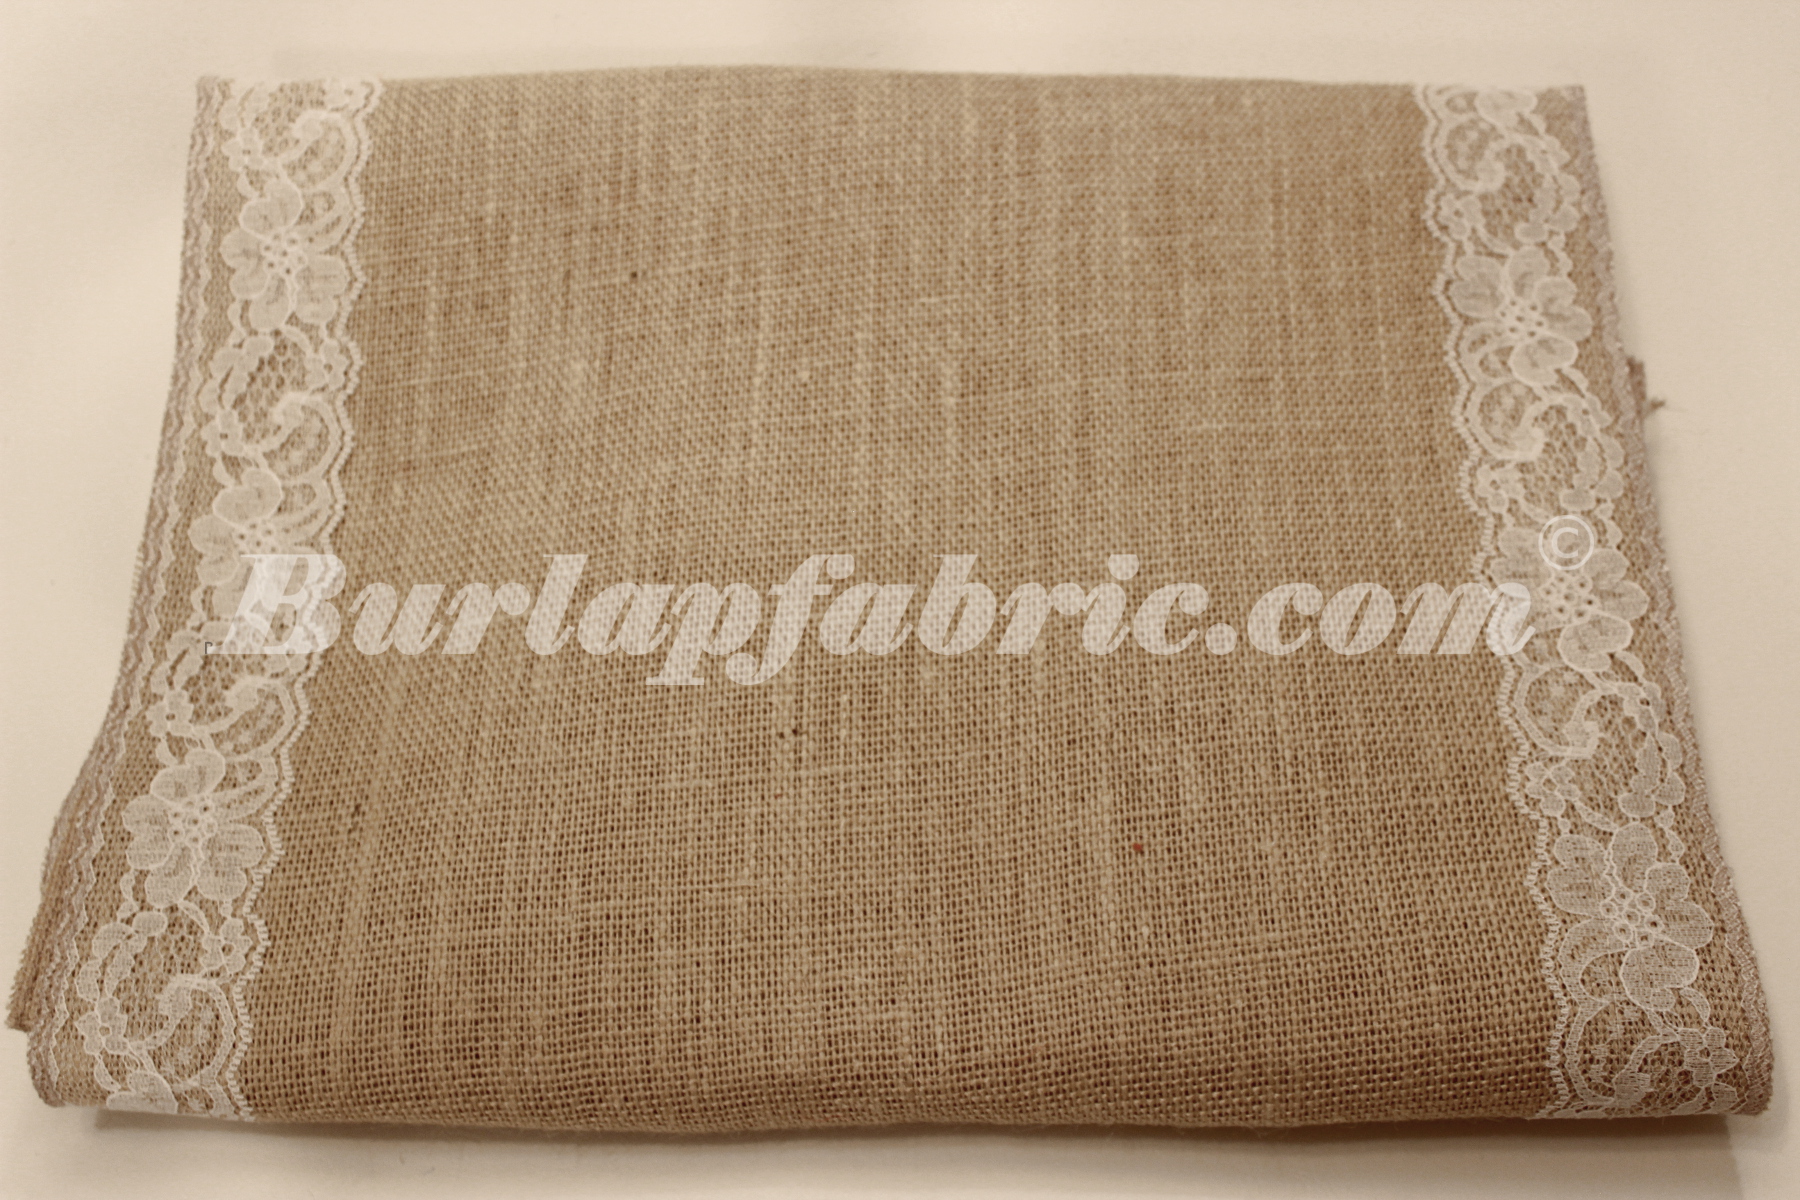 14" Natural Burlap Runner with 2" White Lace Borders - Click Image to Close